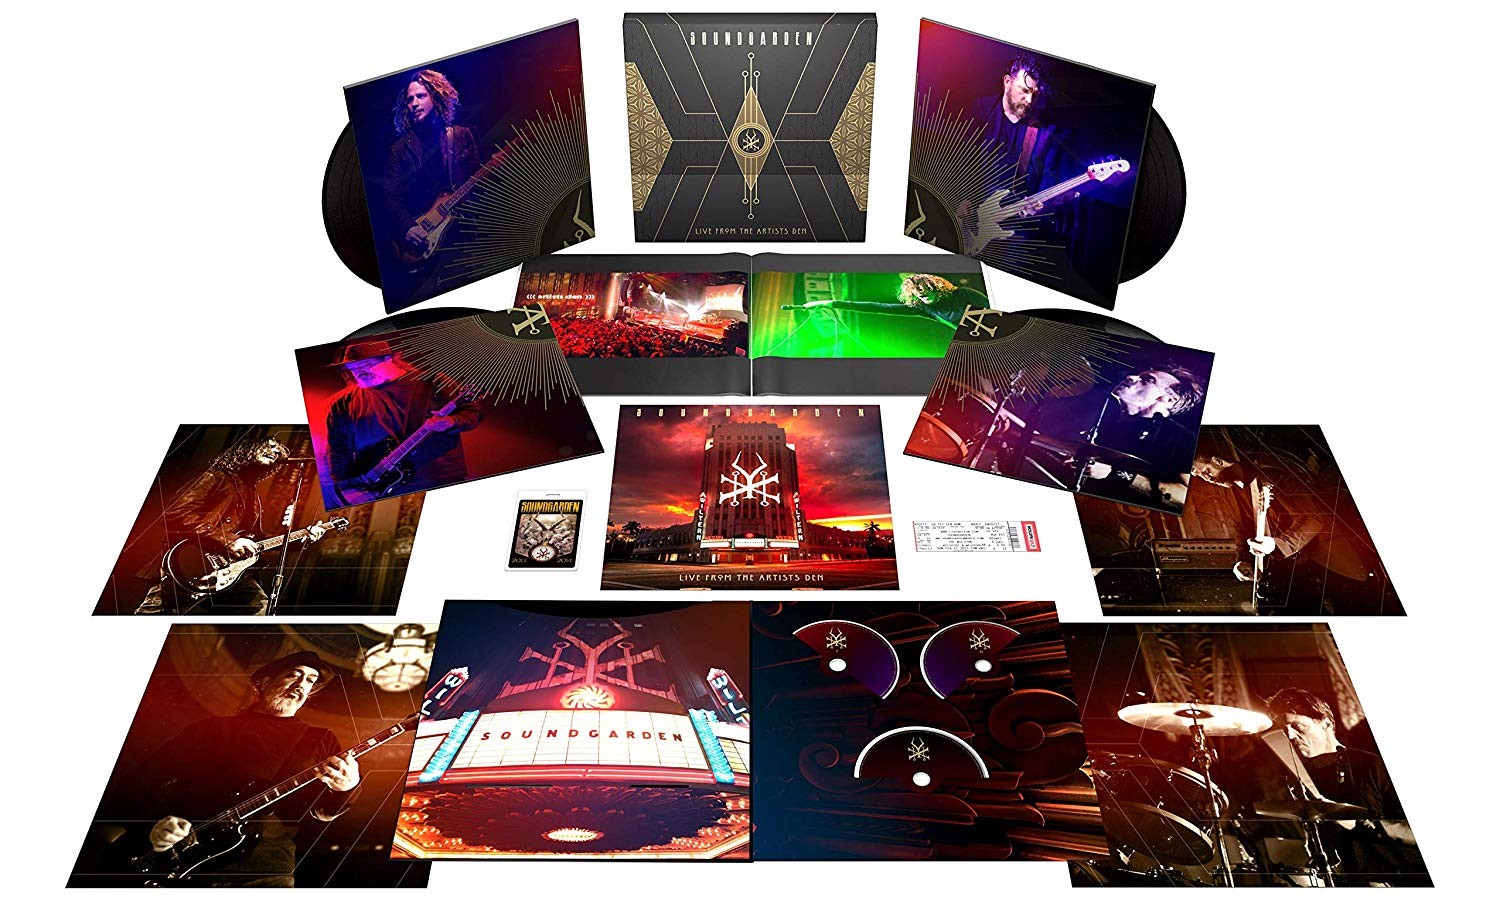 Soundgarden - Live From The Artists Den (Deluxe) Boxset